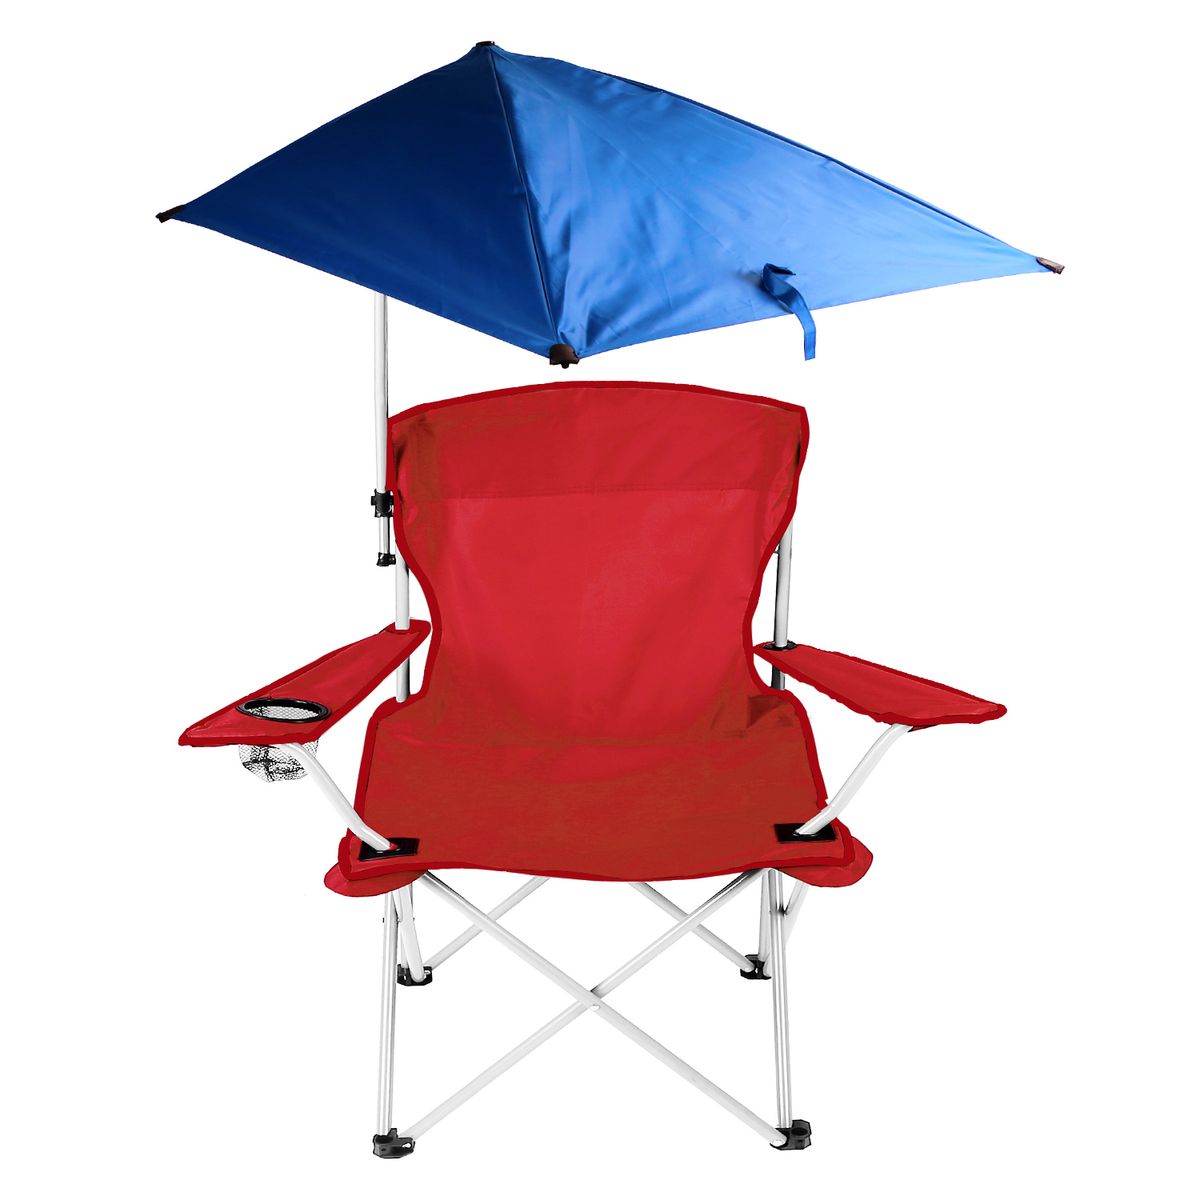 Photos - Garden Furniture LakeForest LakeForest Foldable Beach Chair - Red HGBEACHCHAIRGPCT4106(RED)